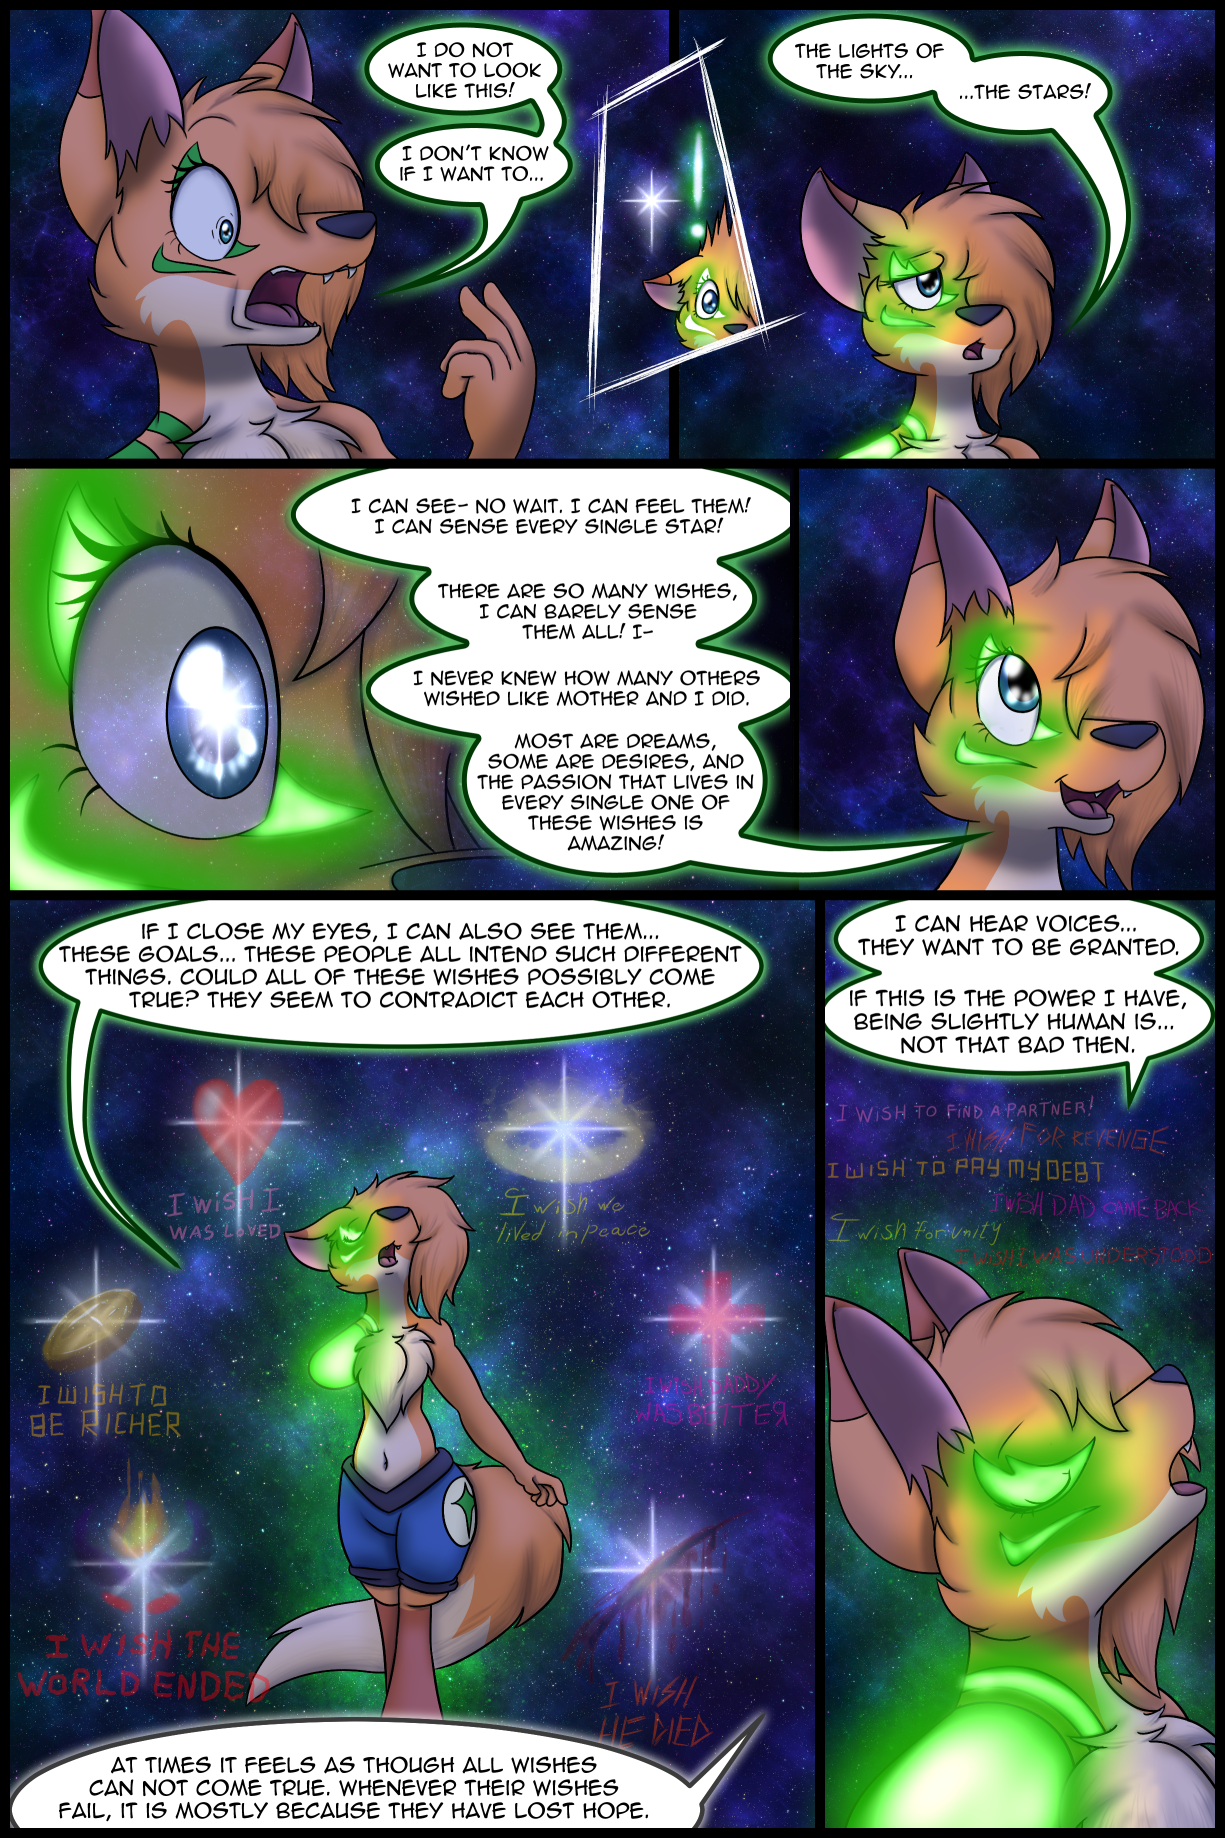 Ch1 Remastered Page 24-25 – That Feeling… – The many wishes